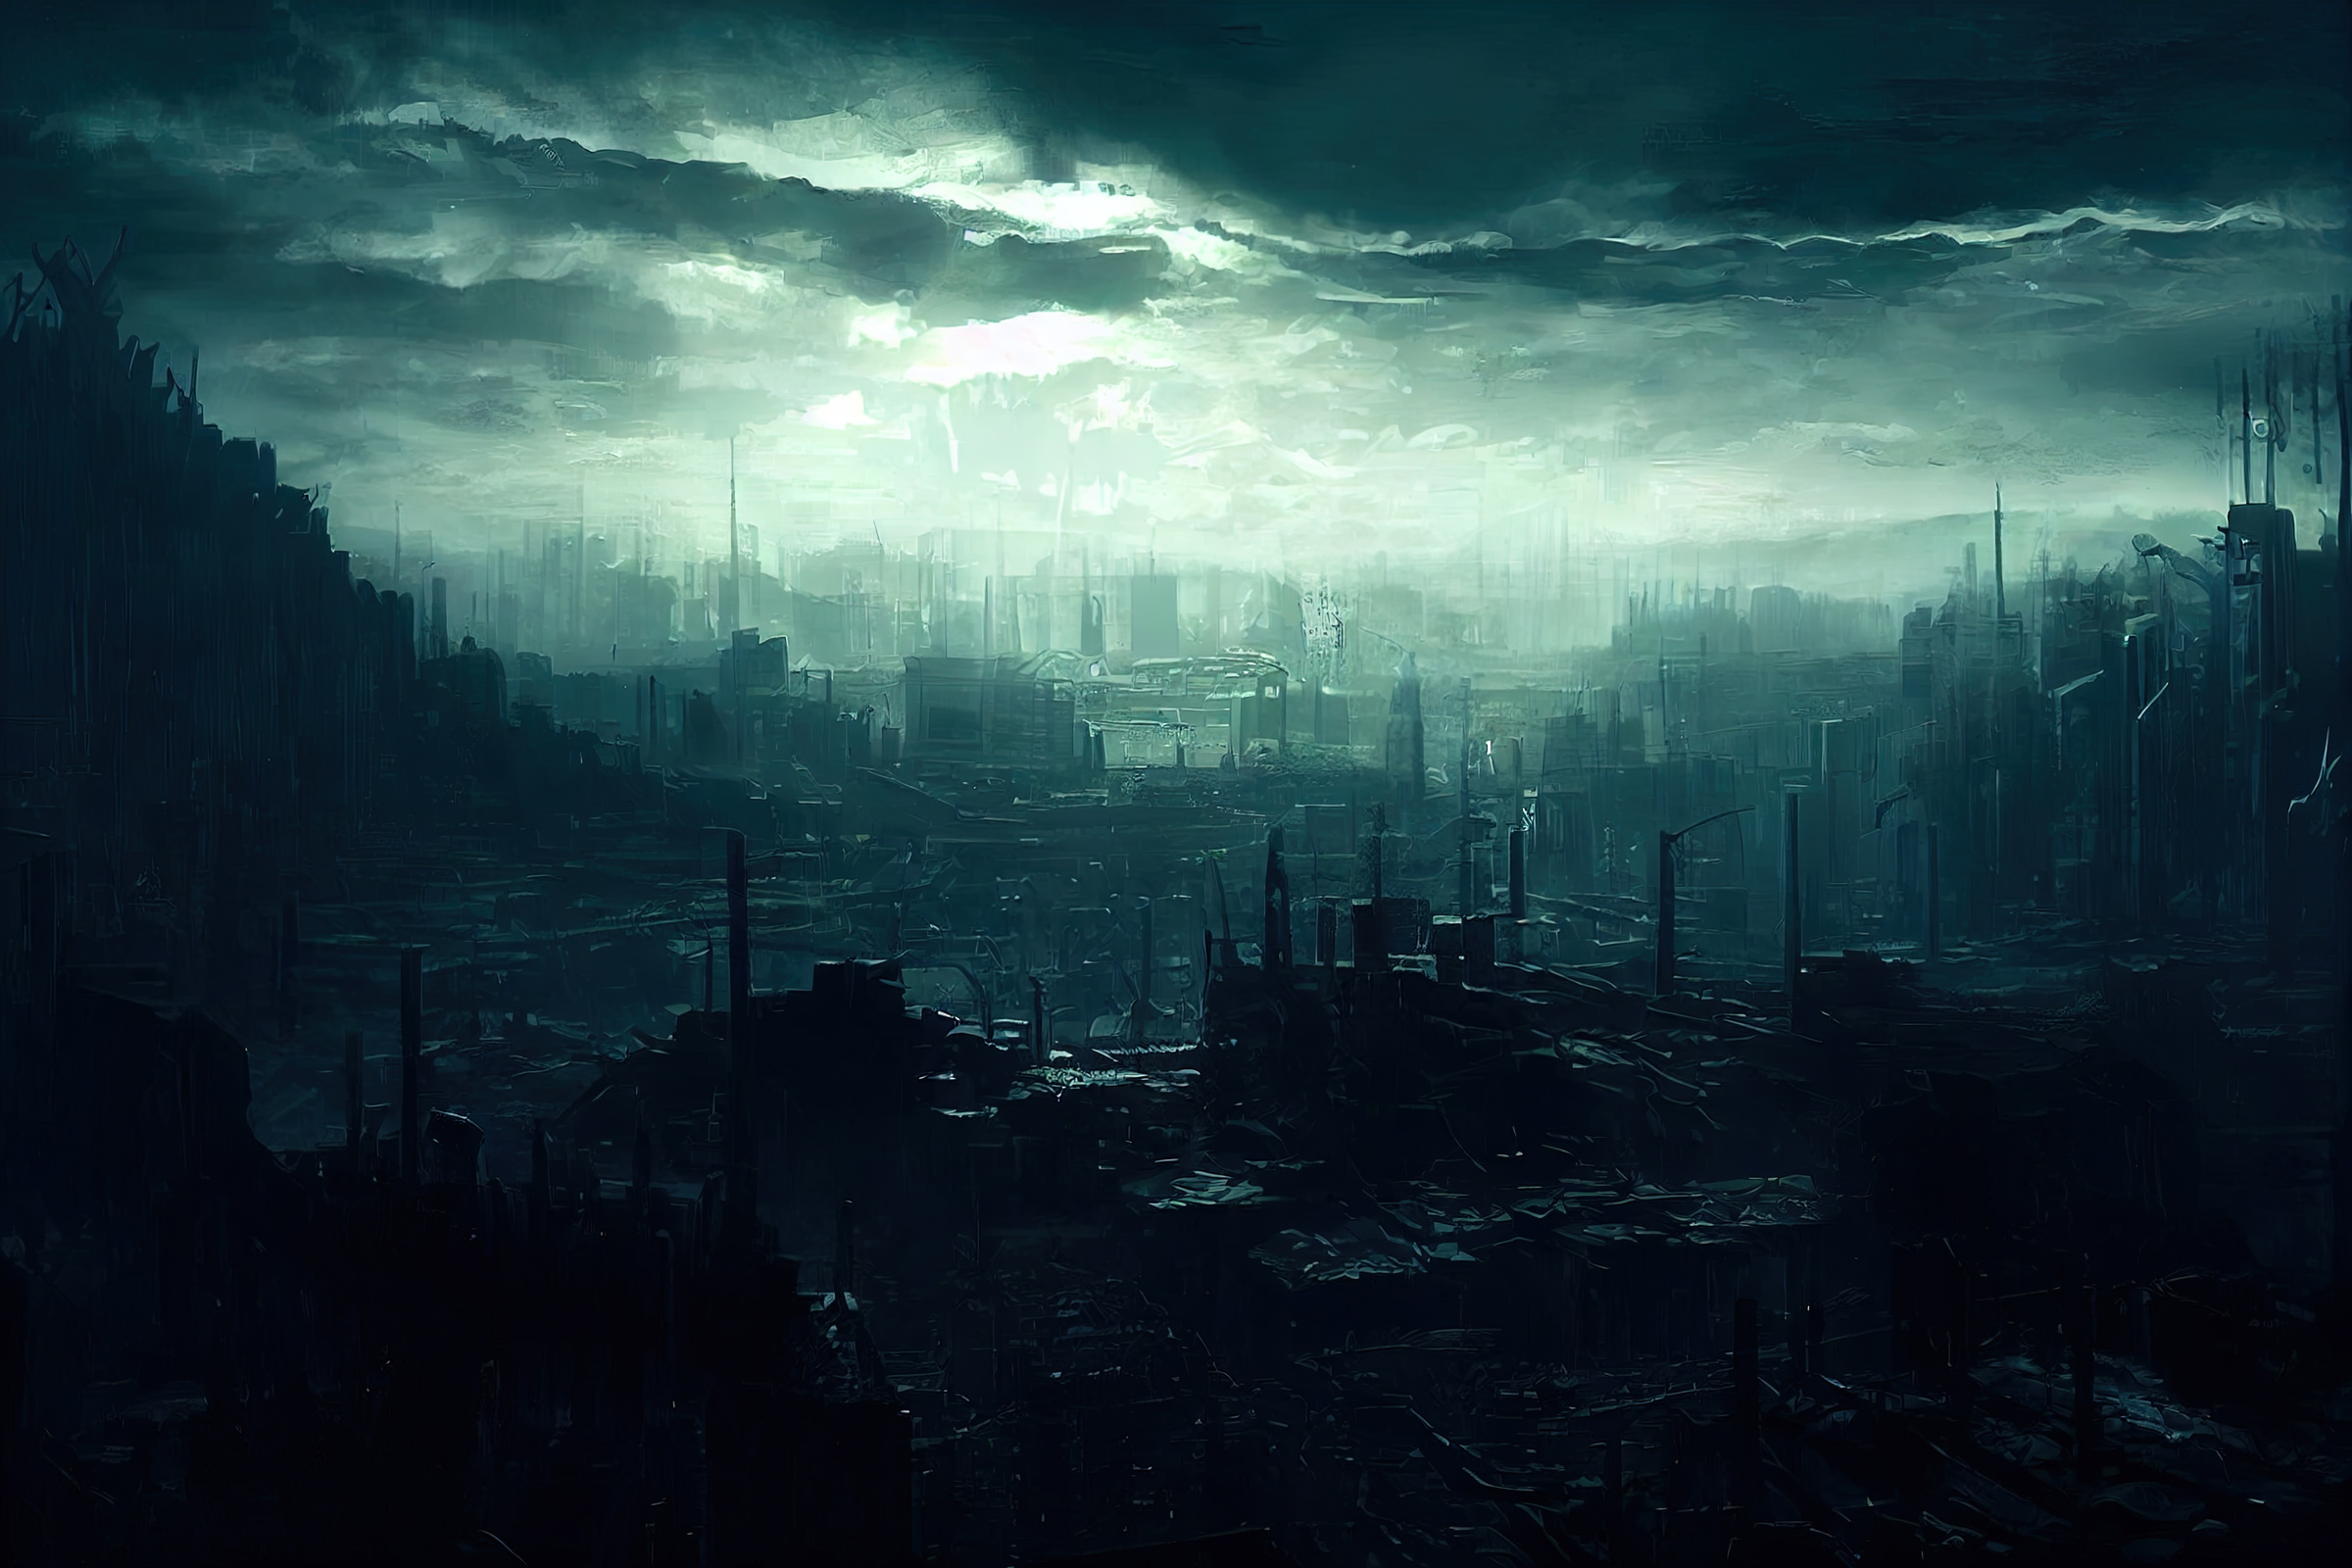 The ruins of a big city with silhouettes of destroyed buildings